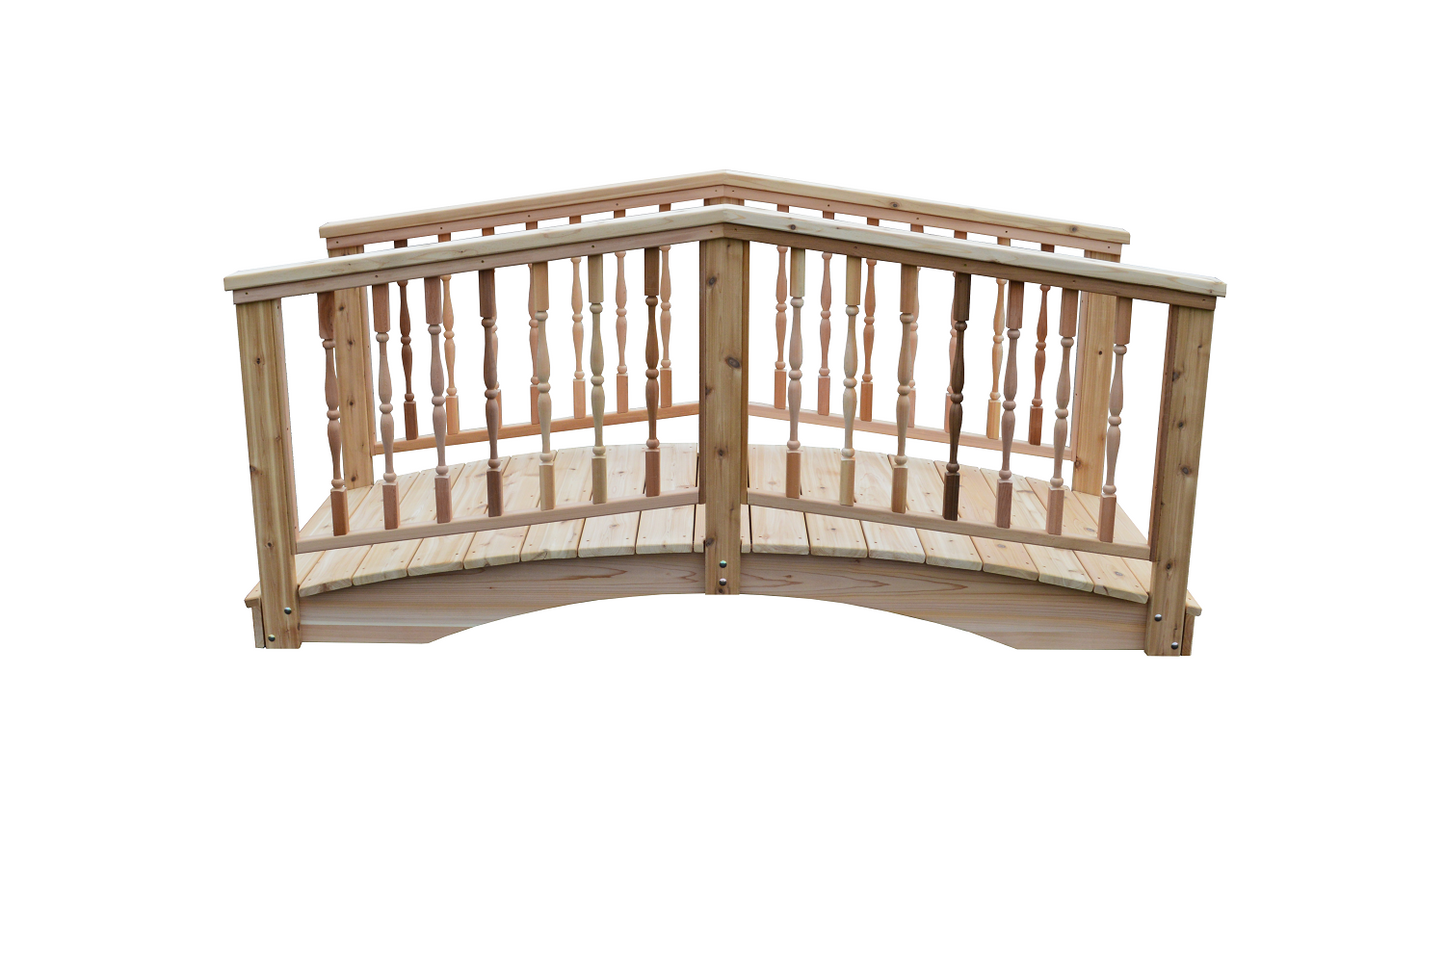 A&L Furniture Co. Western Red Cedar 3' x 4' Spindle Bridge - LEAD TIME TO SHIP 2 WEEKS